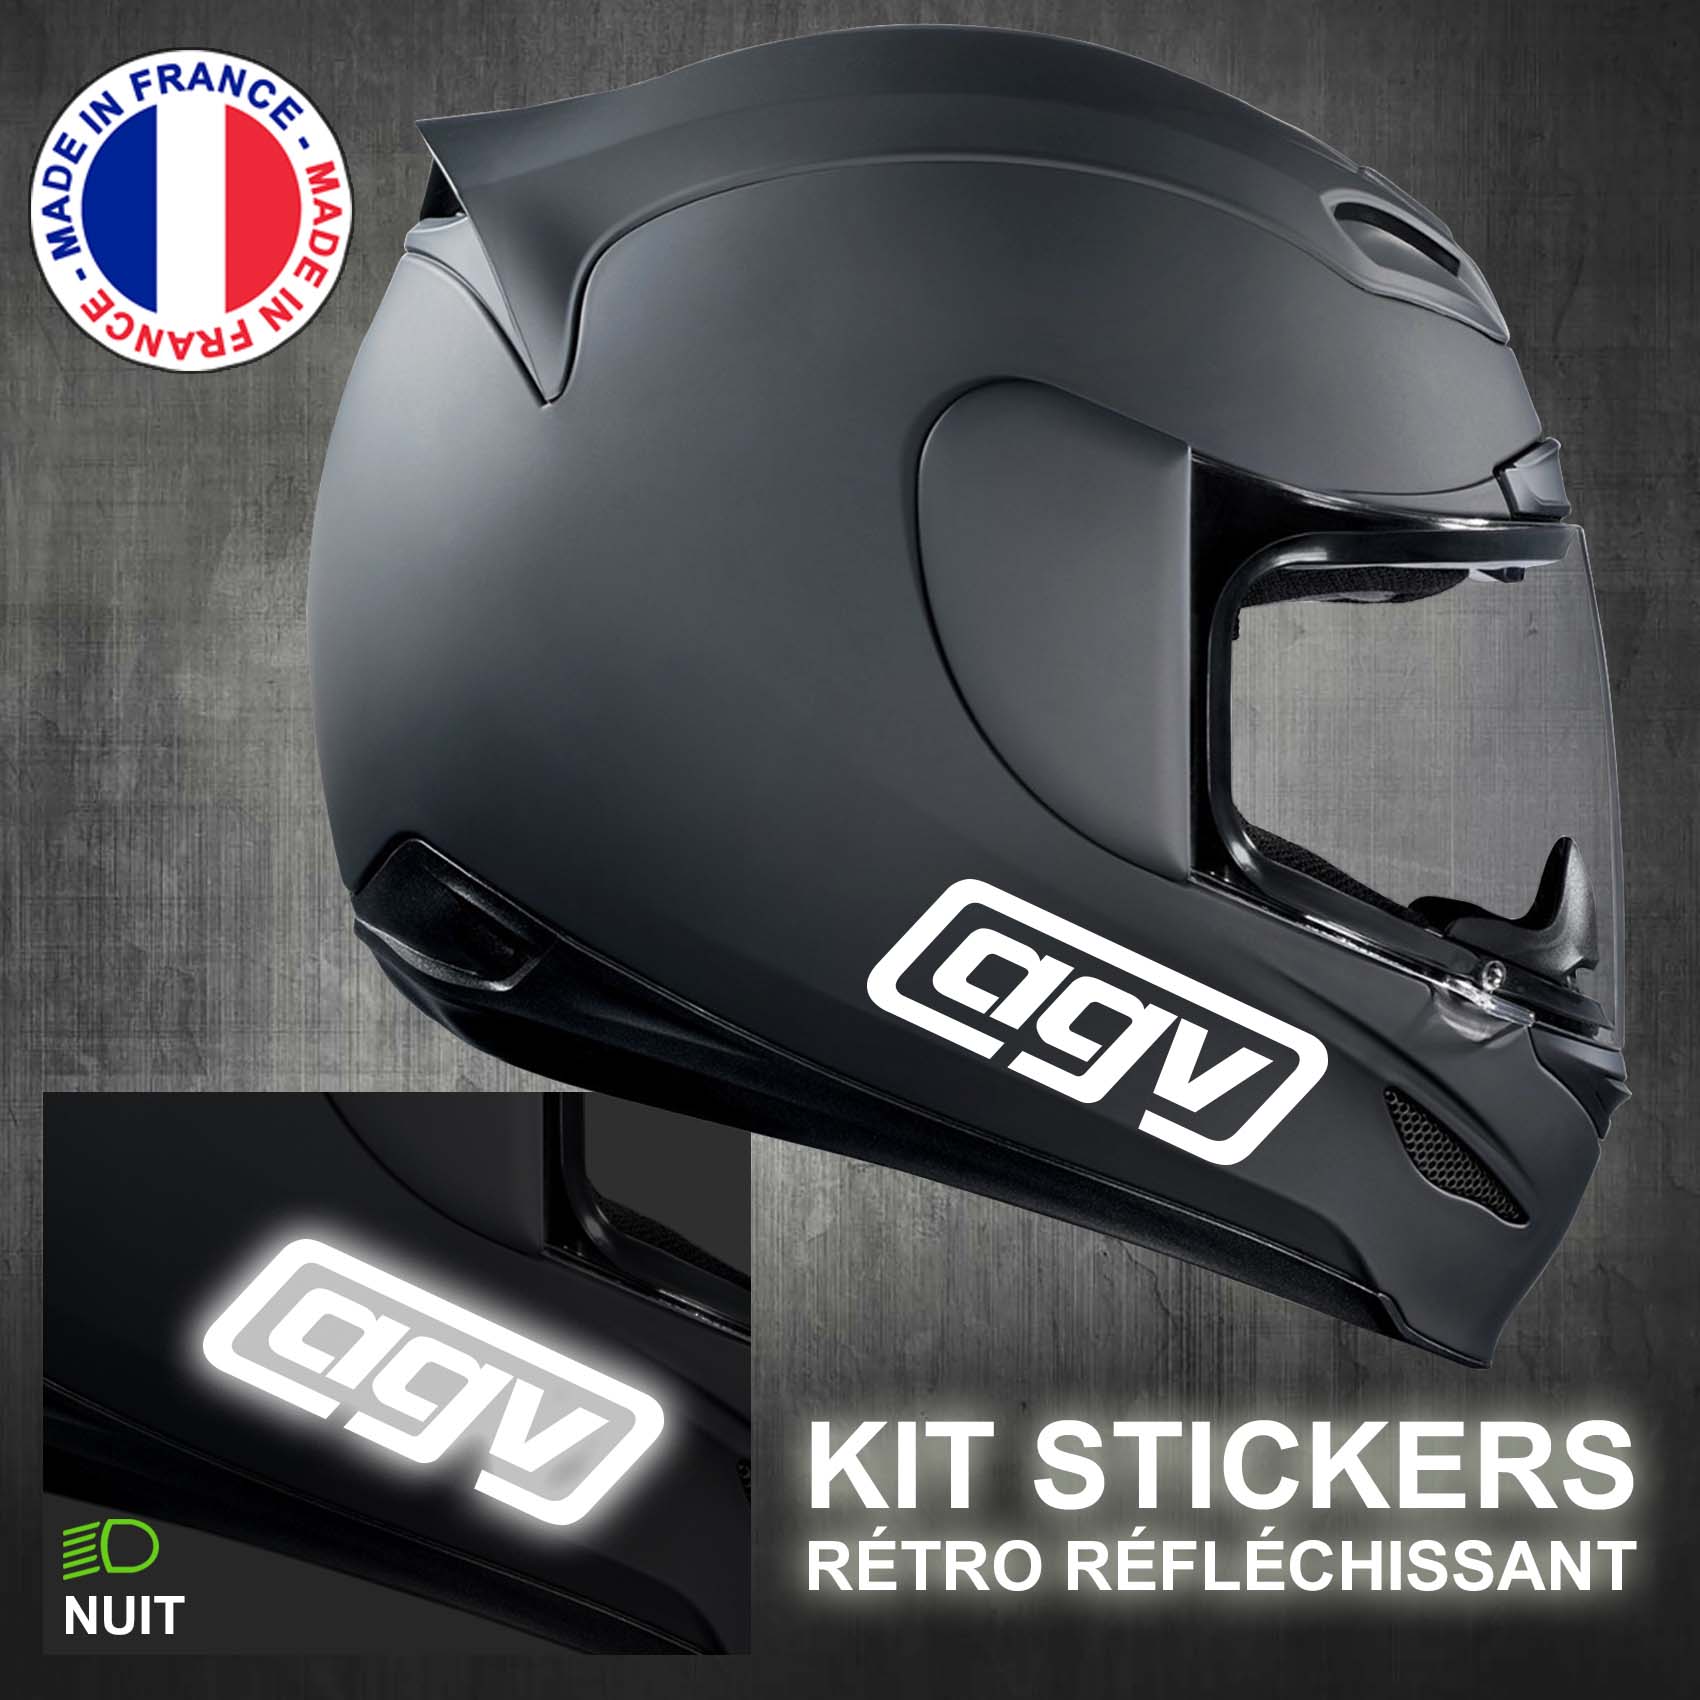 stickers-casque-moto-agv-ref1-retro-reflechissant-autocollant-noir-moto-velo-tuning-racing-route-sticker-casques-adhesif-scooter-nuit-securite-decals-personnalise-personnalisable-min